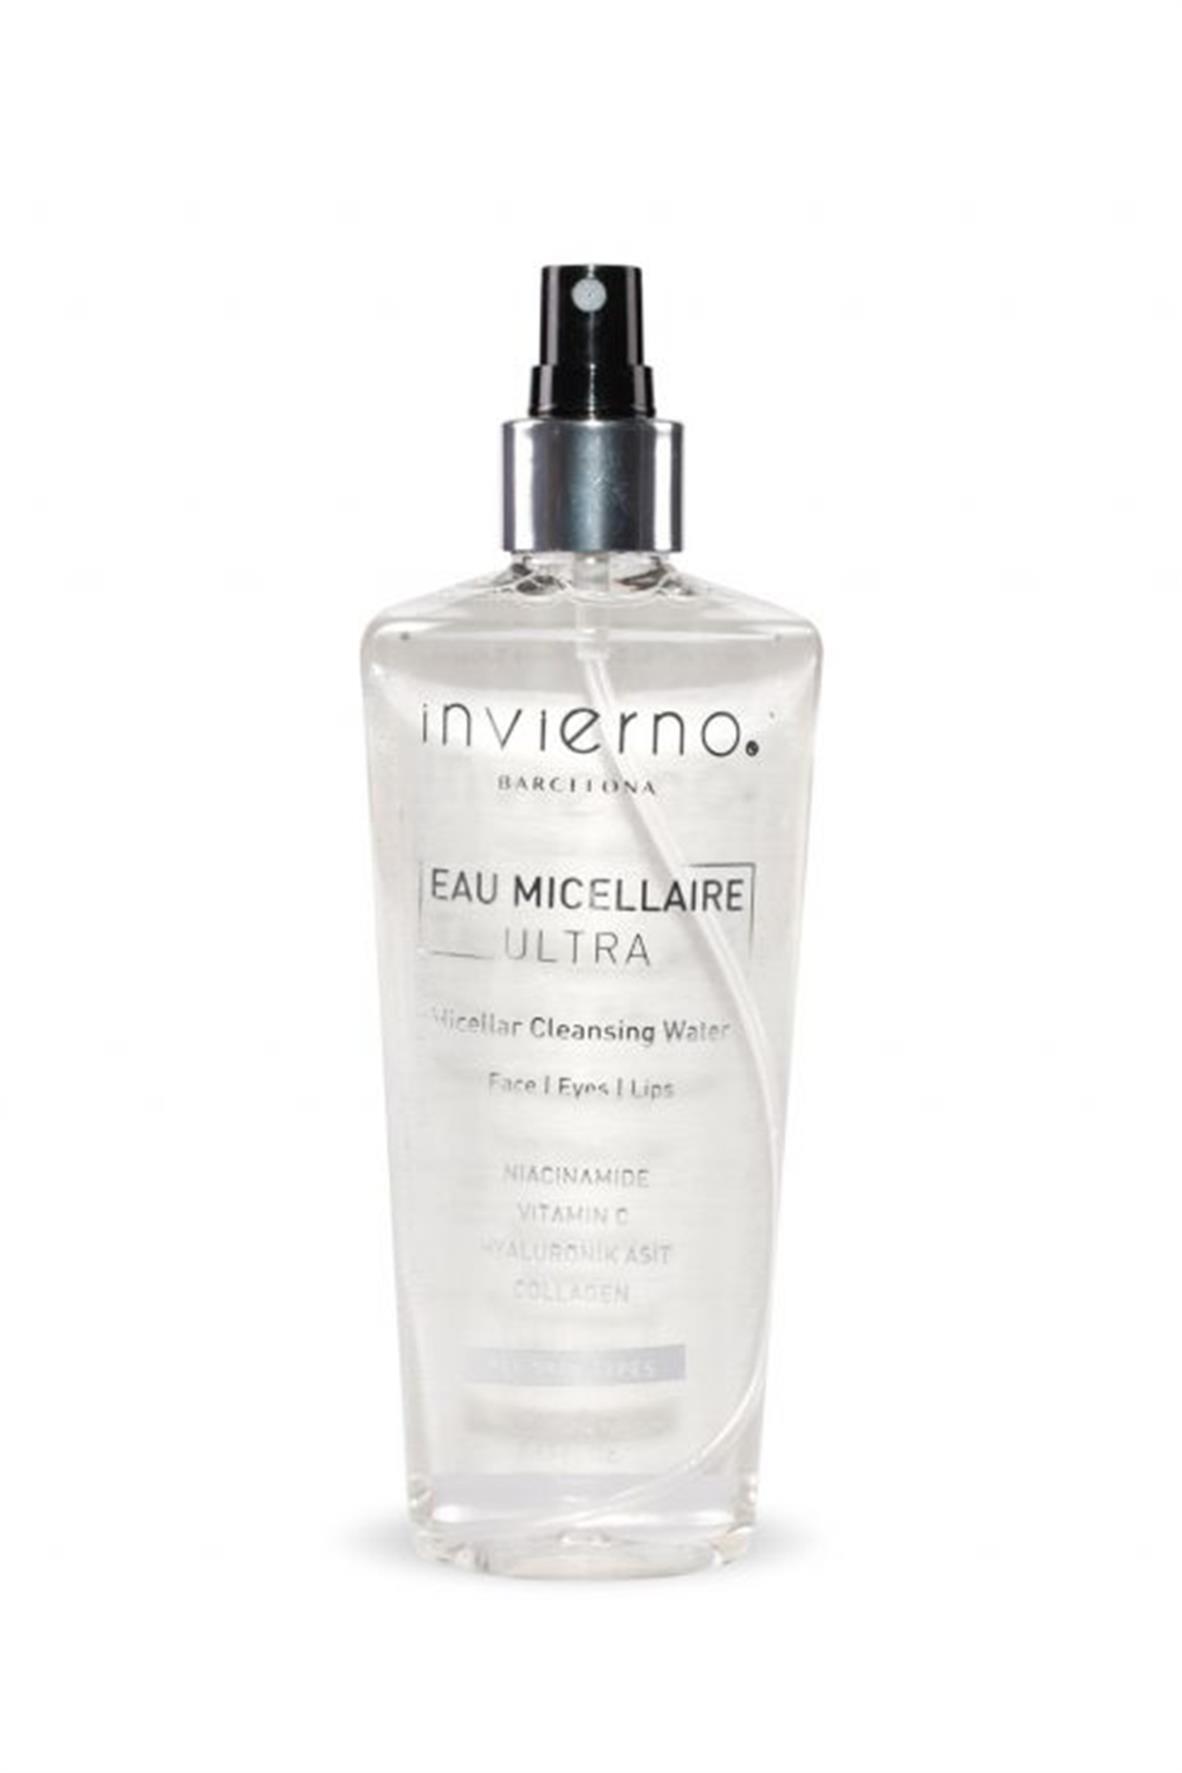 Invierno Micellar Cleansing Water 250 ml